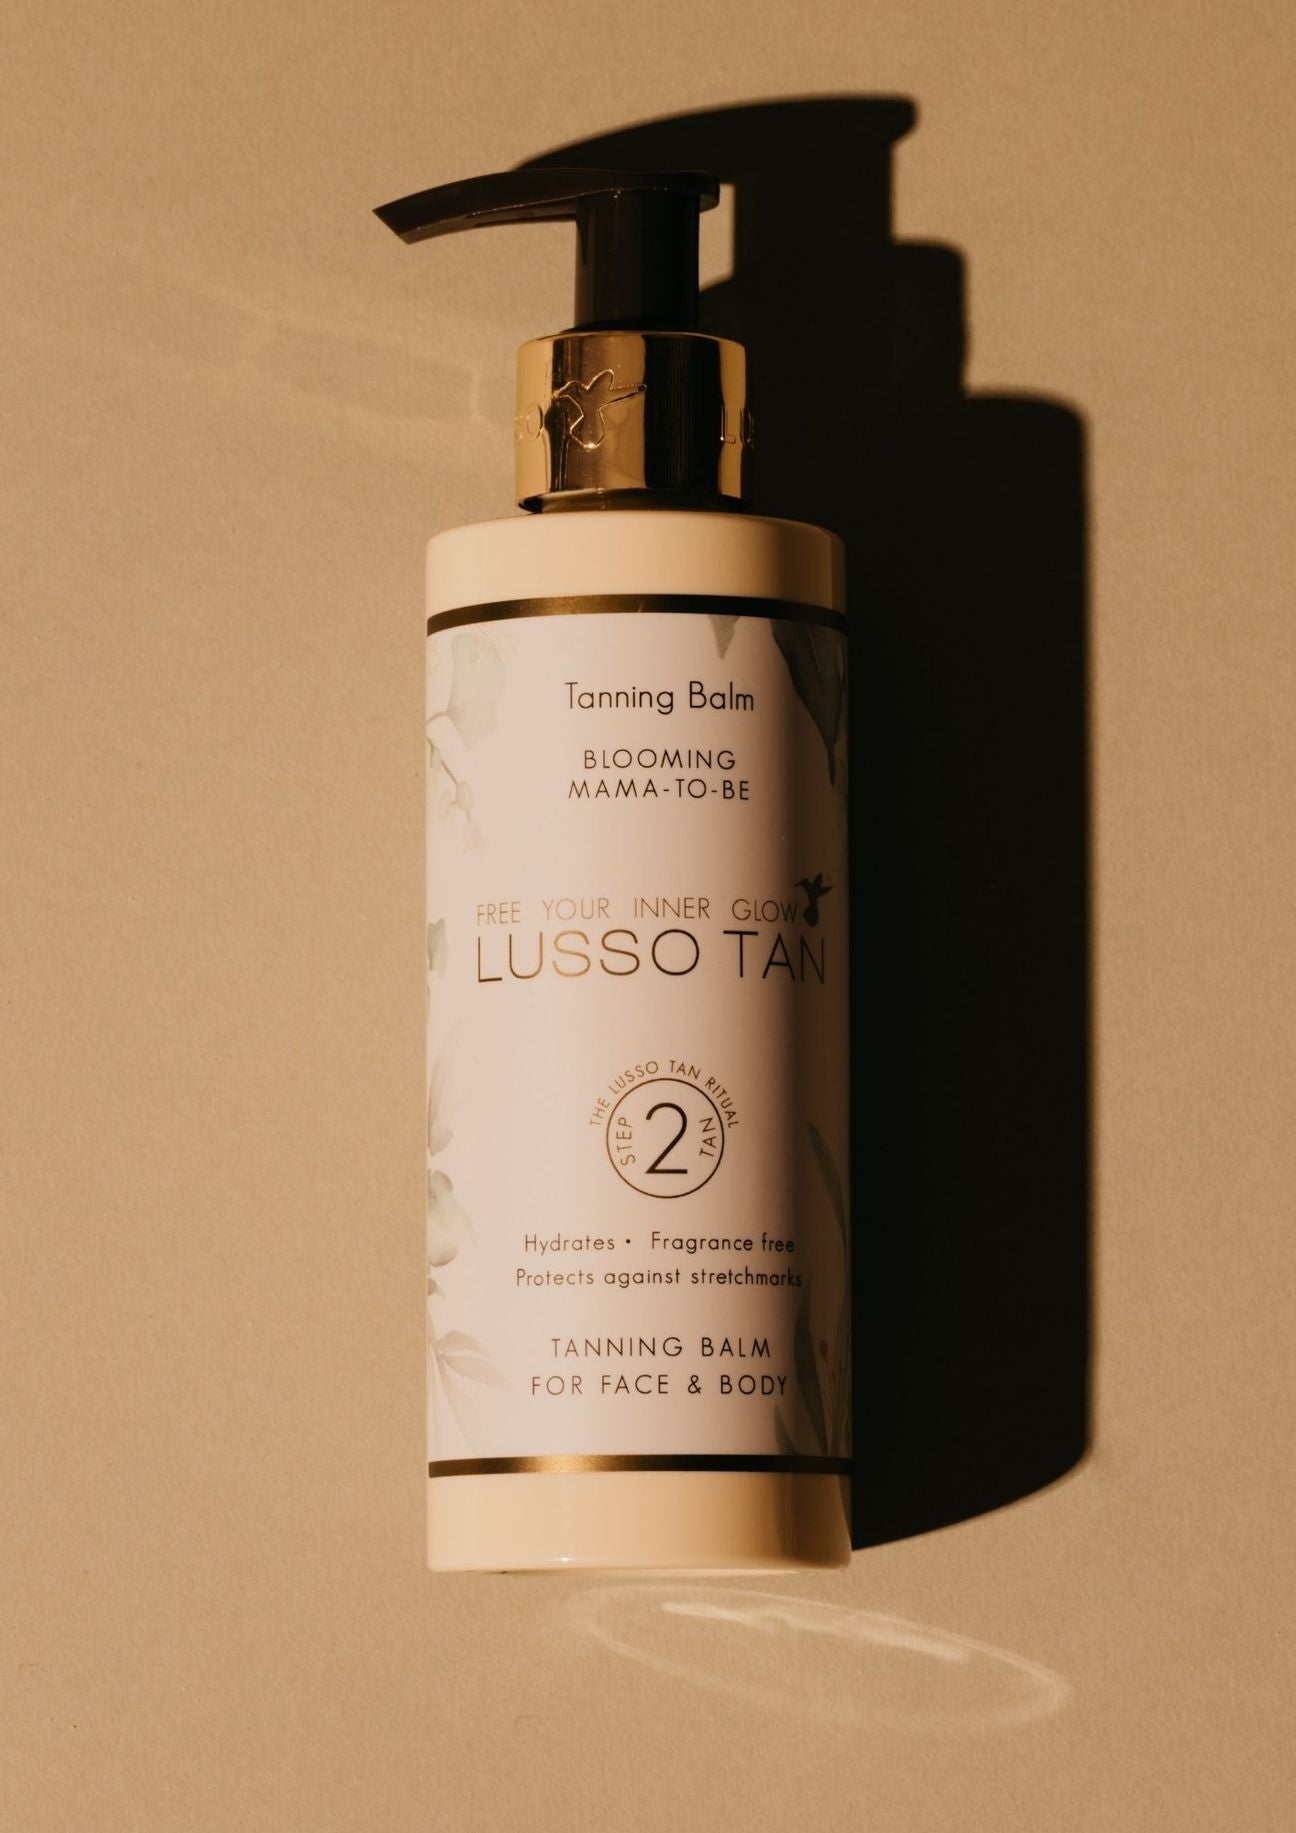 Lusso Tan - Blooming Mama To Be Tanning Balm